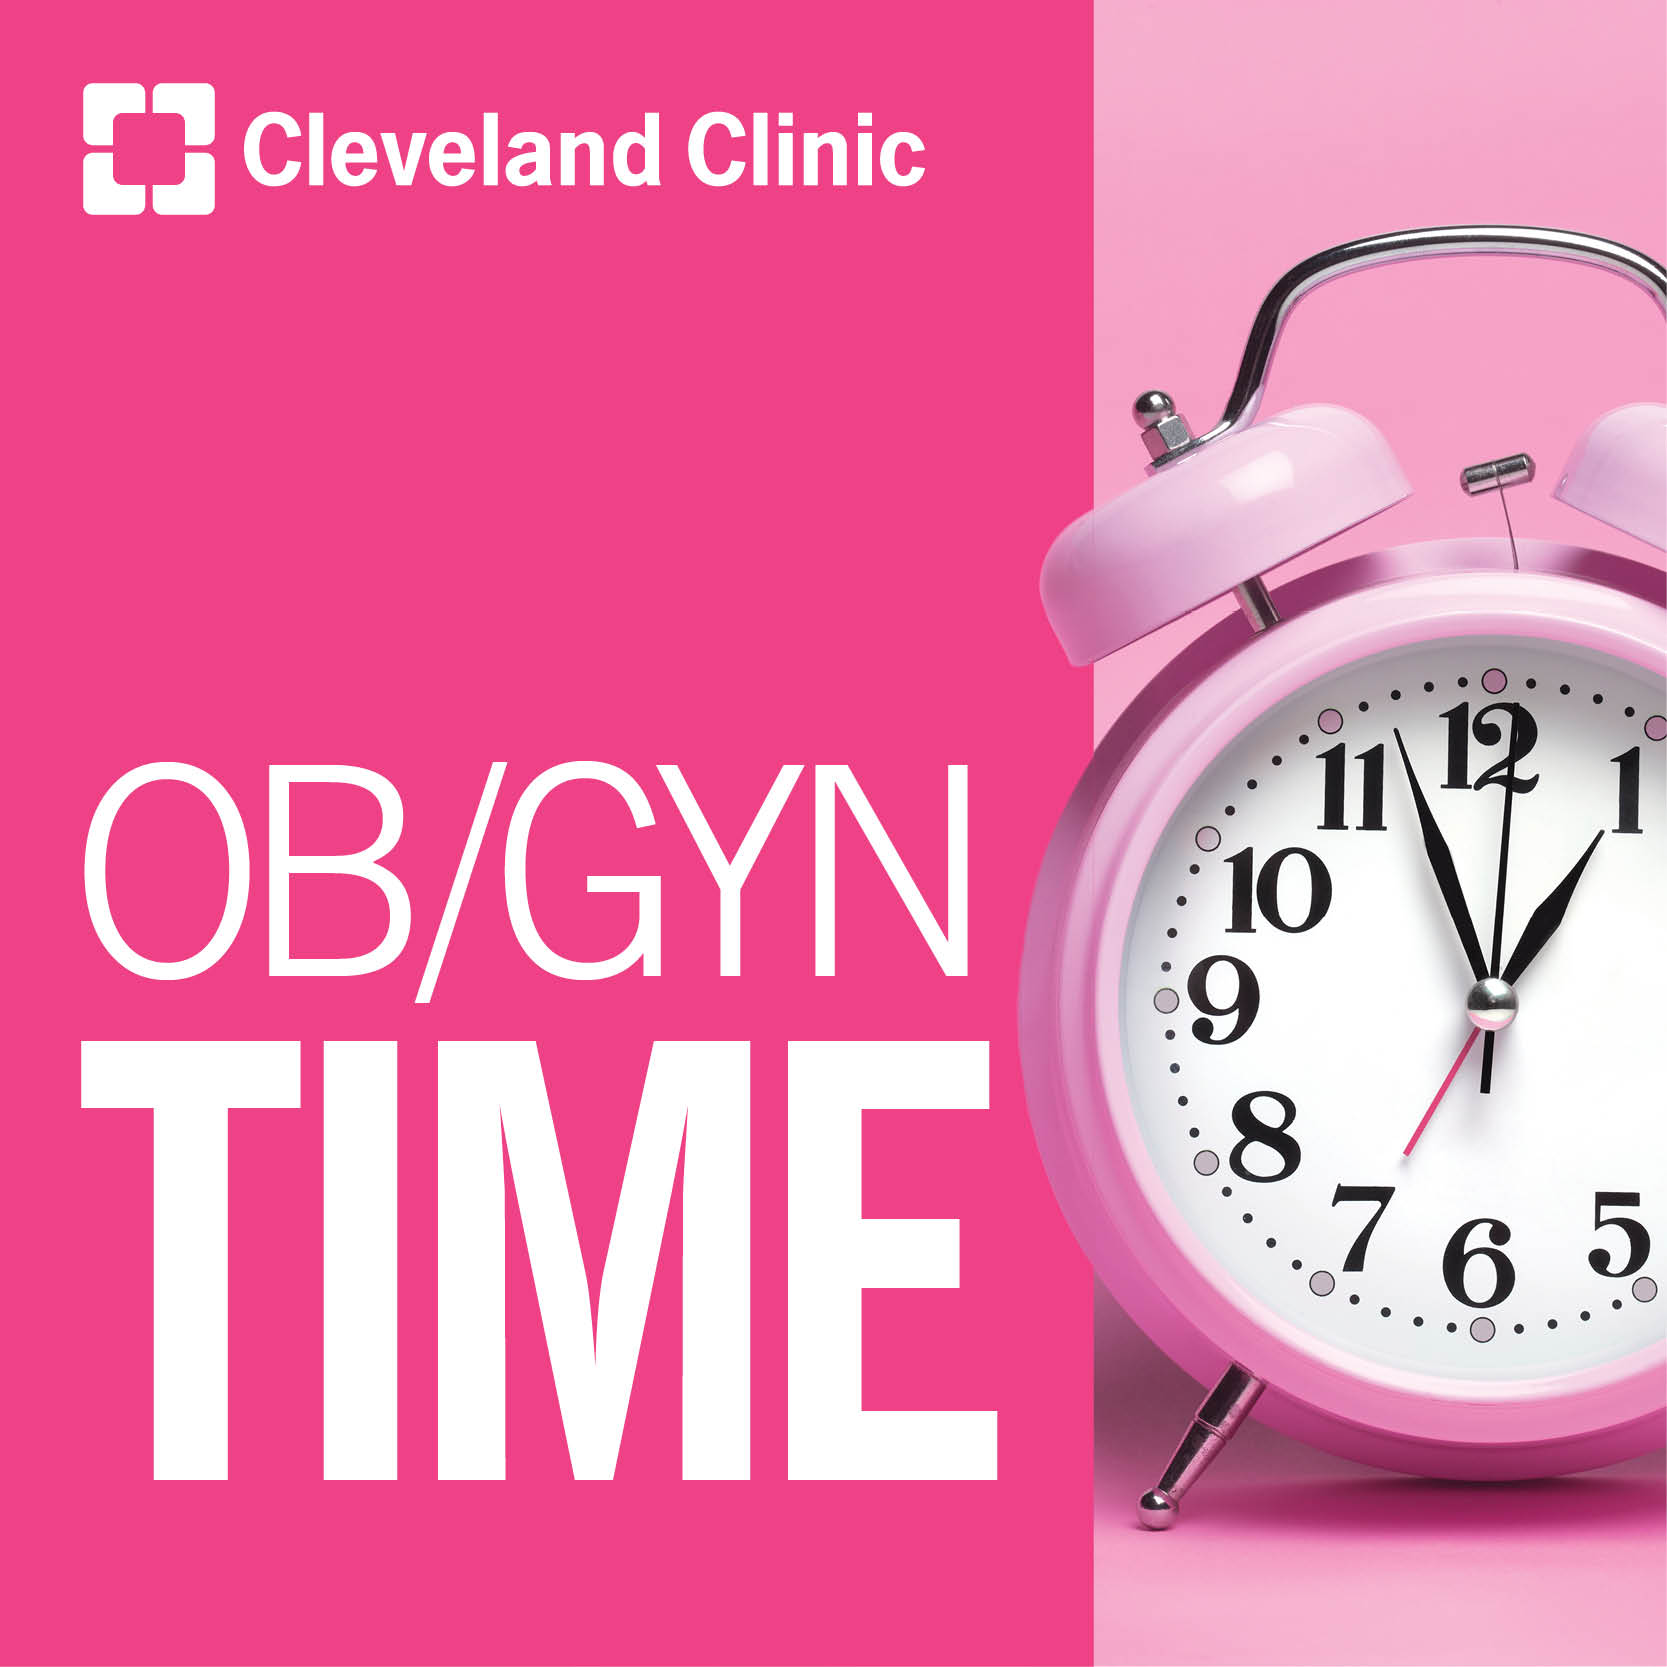 http://my.clevelandclinic.org/-/scassets/images/org/podcast-images/ob-gyn-social-graphic.jpg